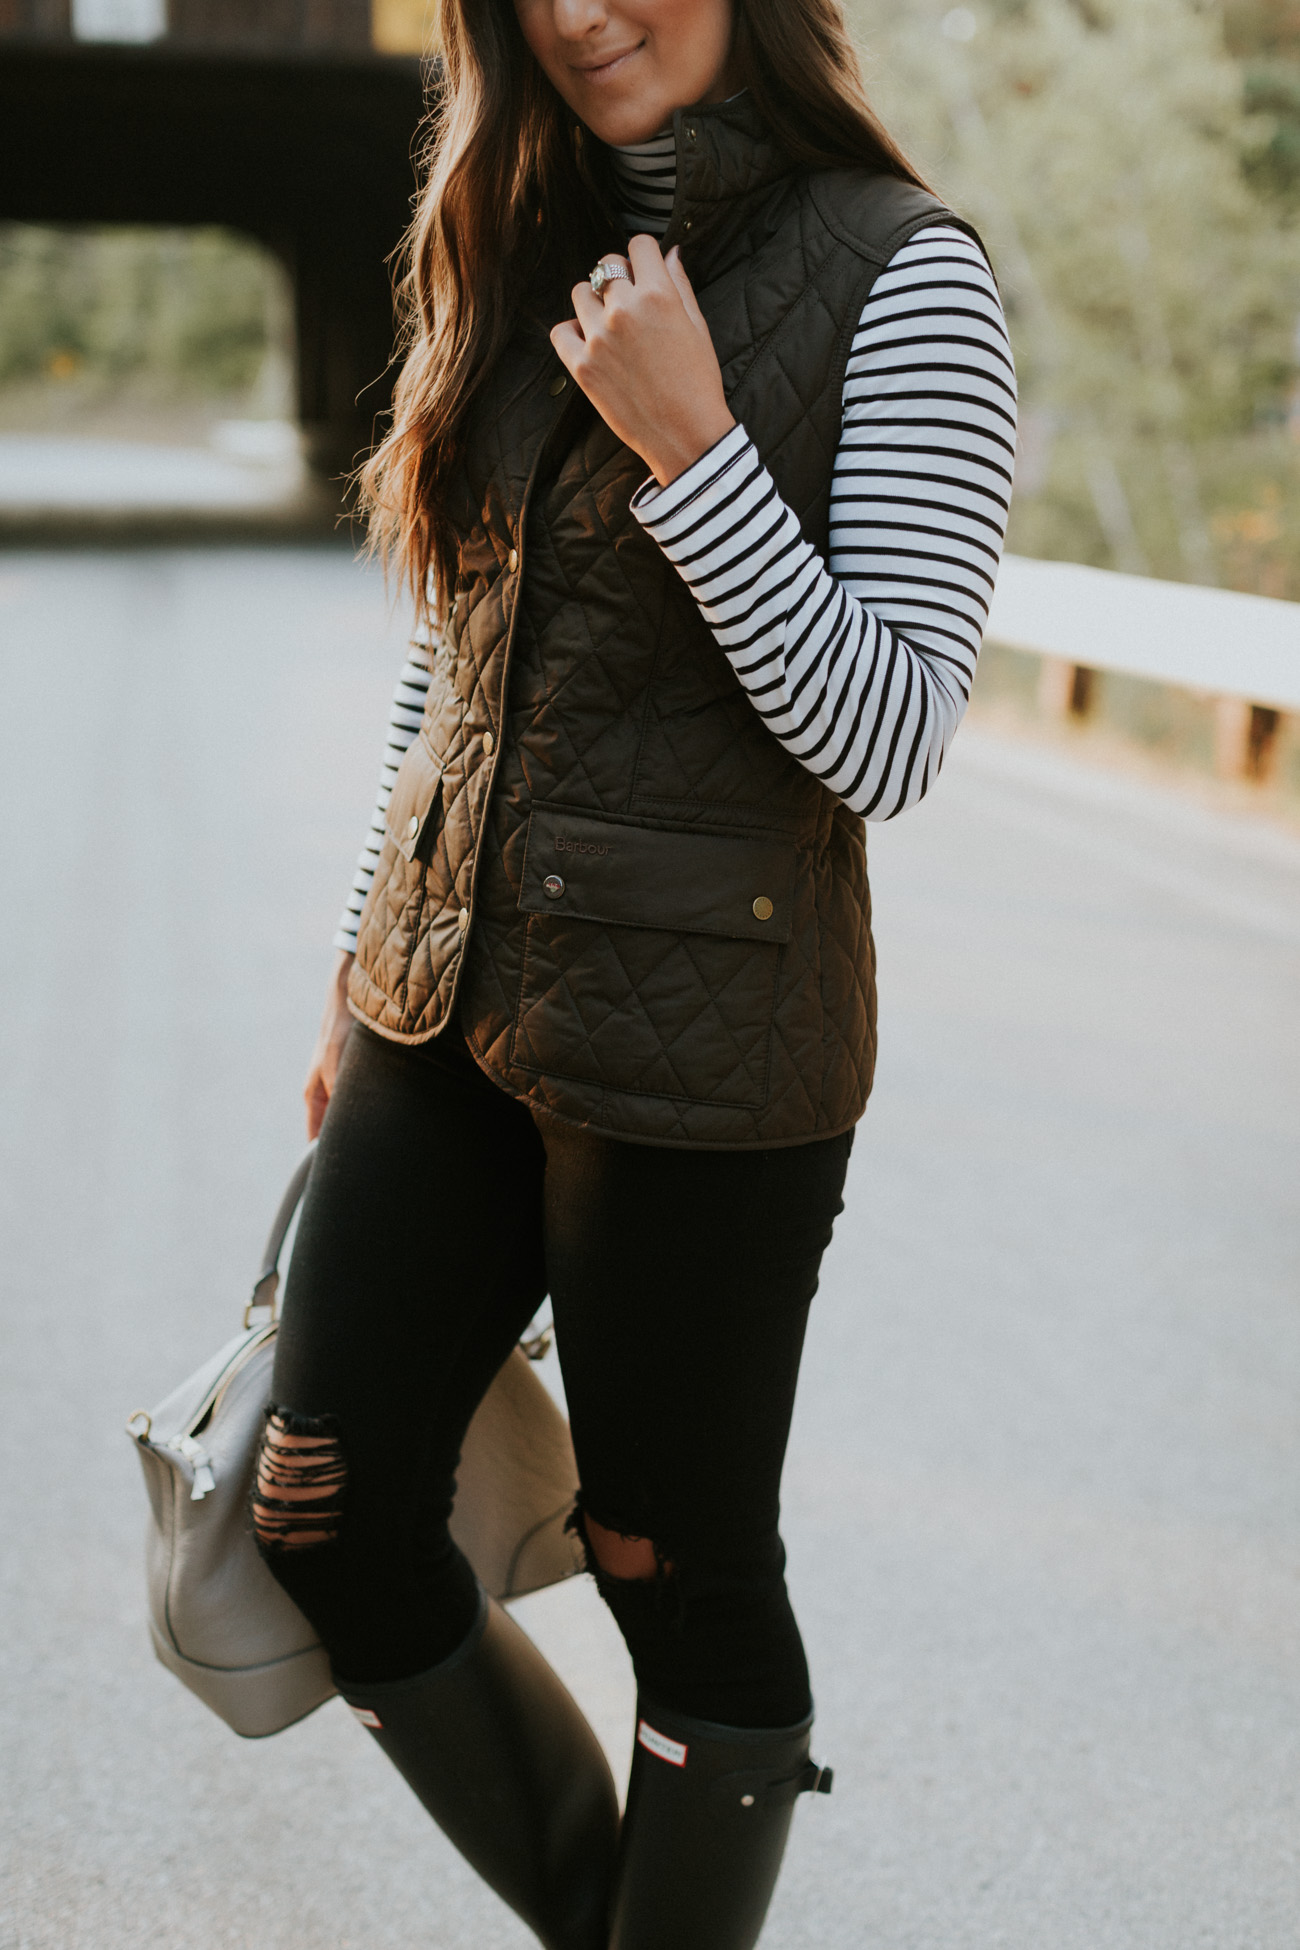 barbour quilted vest, hunter boots, hunter rain boots, hunter wellies, tory burch purse, fall style, stripe turtleneck, new hampshire foliage, vermont foliage, fall outfit ideas, fall outfits, fall fashion // grace wainwright a southern drawl